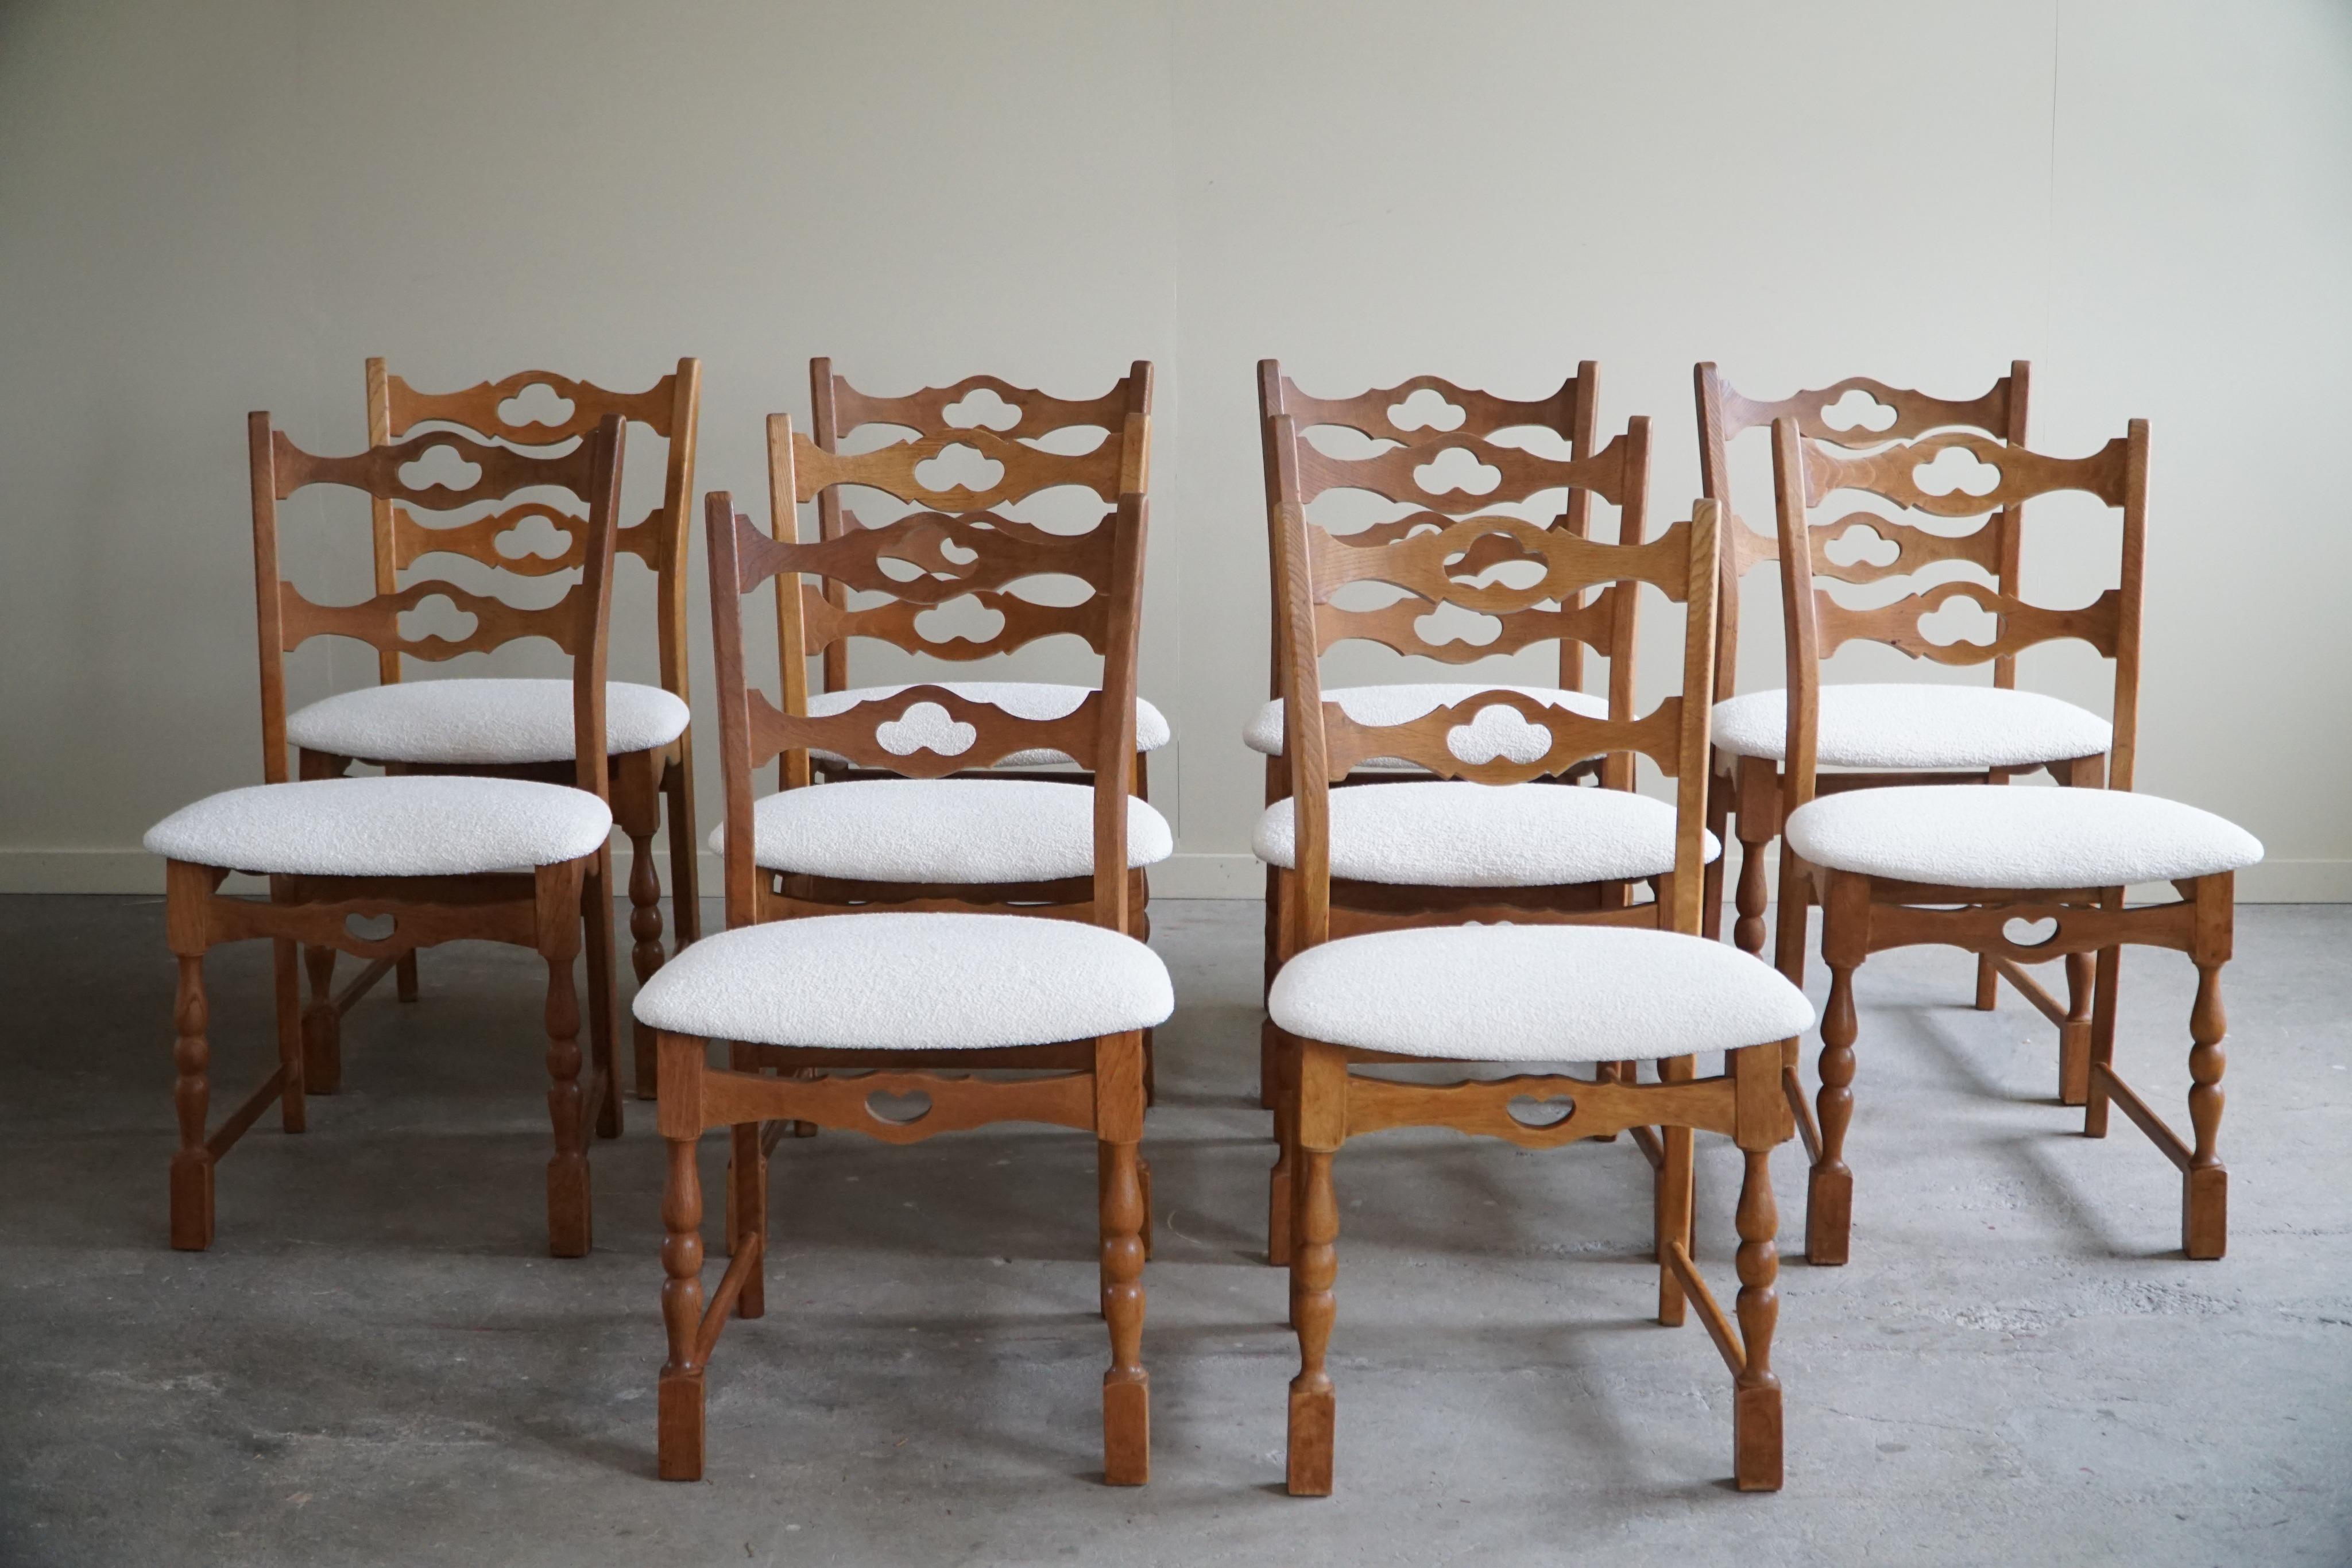 A sculptural classic set of 10 dining chairs in oak, seats reupholstered in white bouclé. 
Attributed to Henning (Henry) Kjærnulf for E.G. Møbler - ca 1960s.

The overall impression of these mid century chairs are really good.
These modern chairs